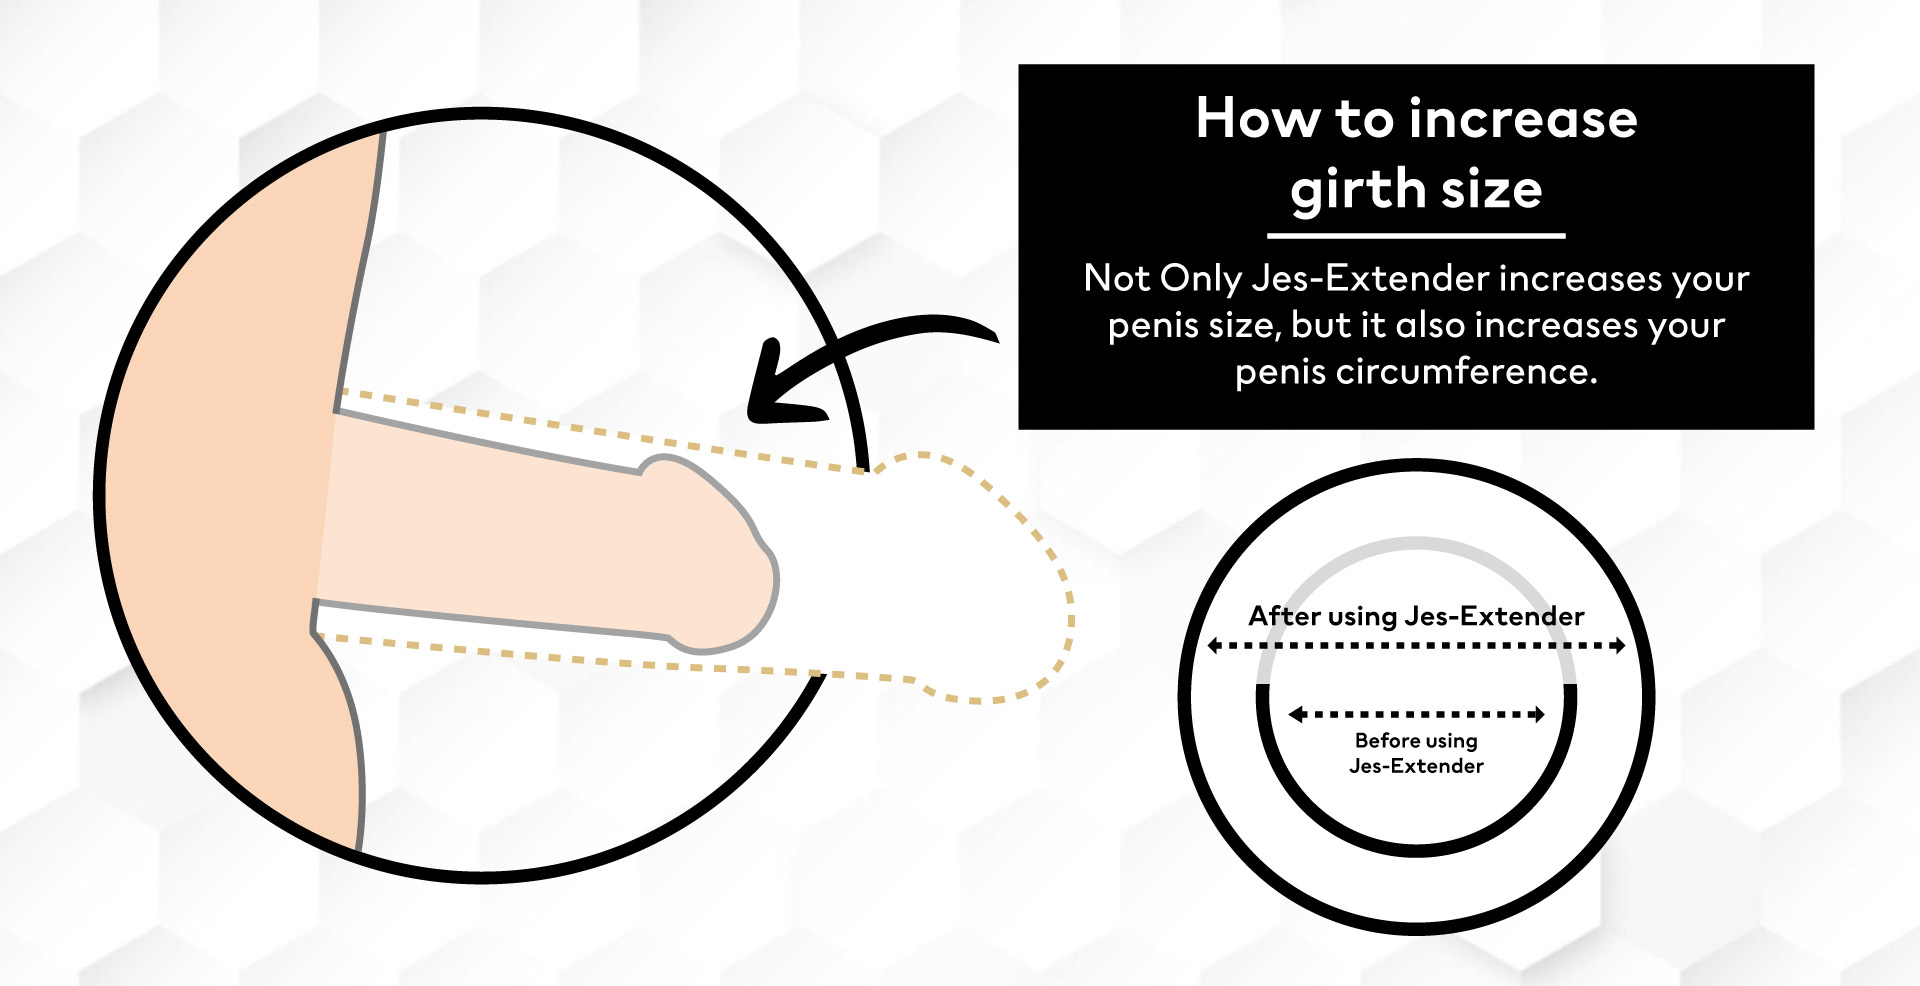 how to increase girth size